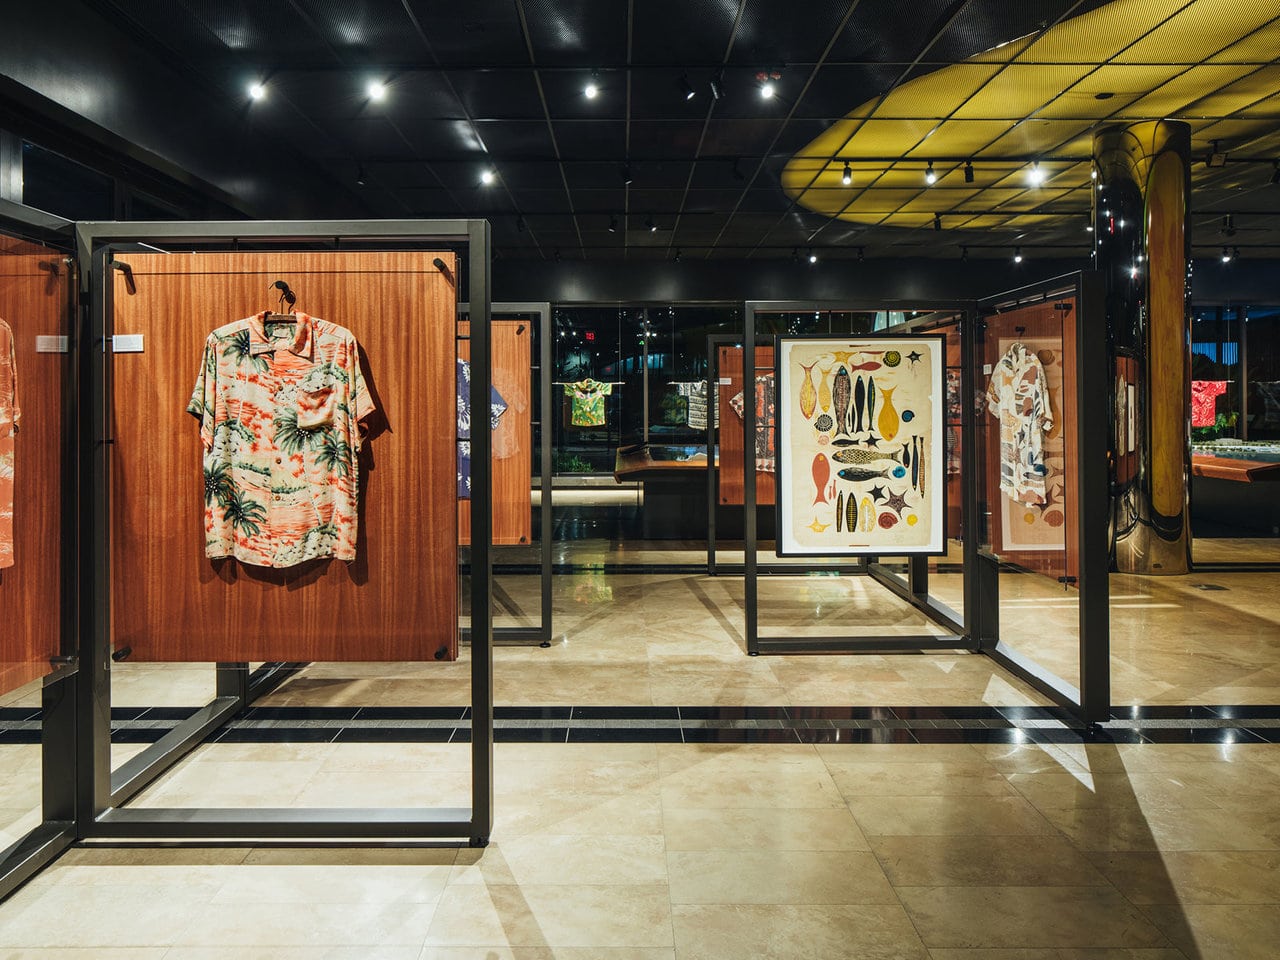 An exhibit of Aloha shirts and artistic prints